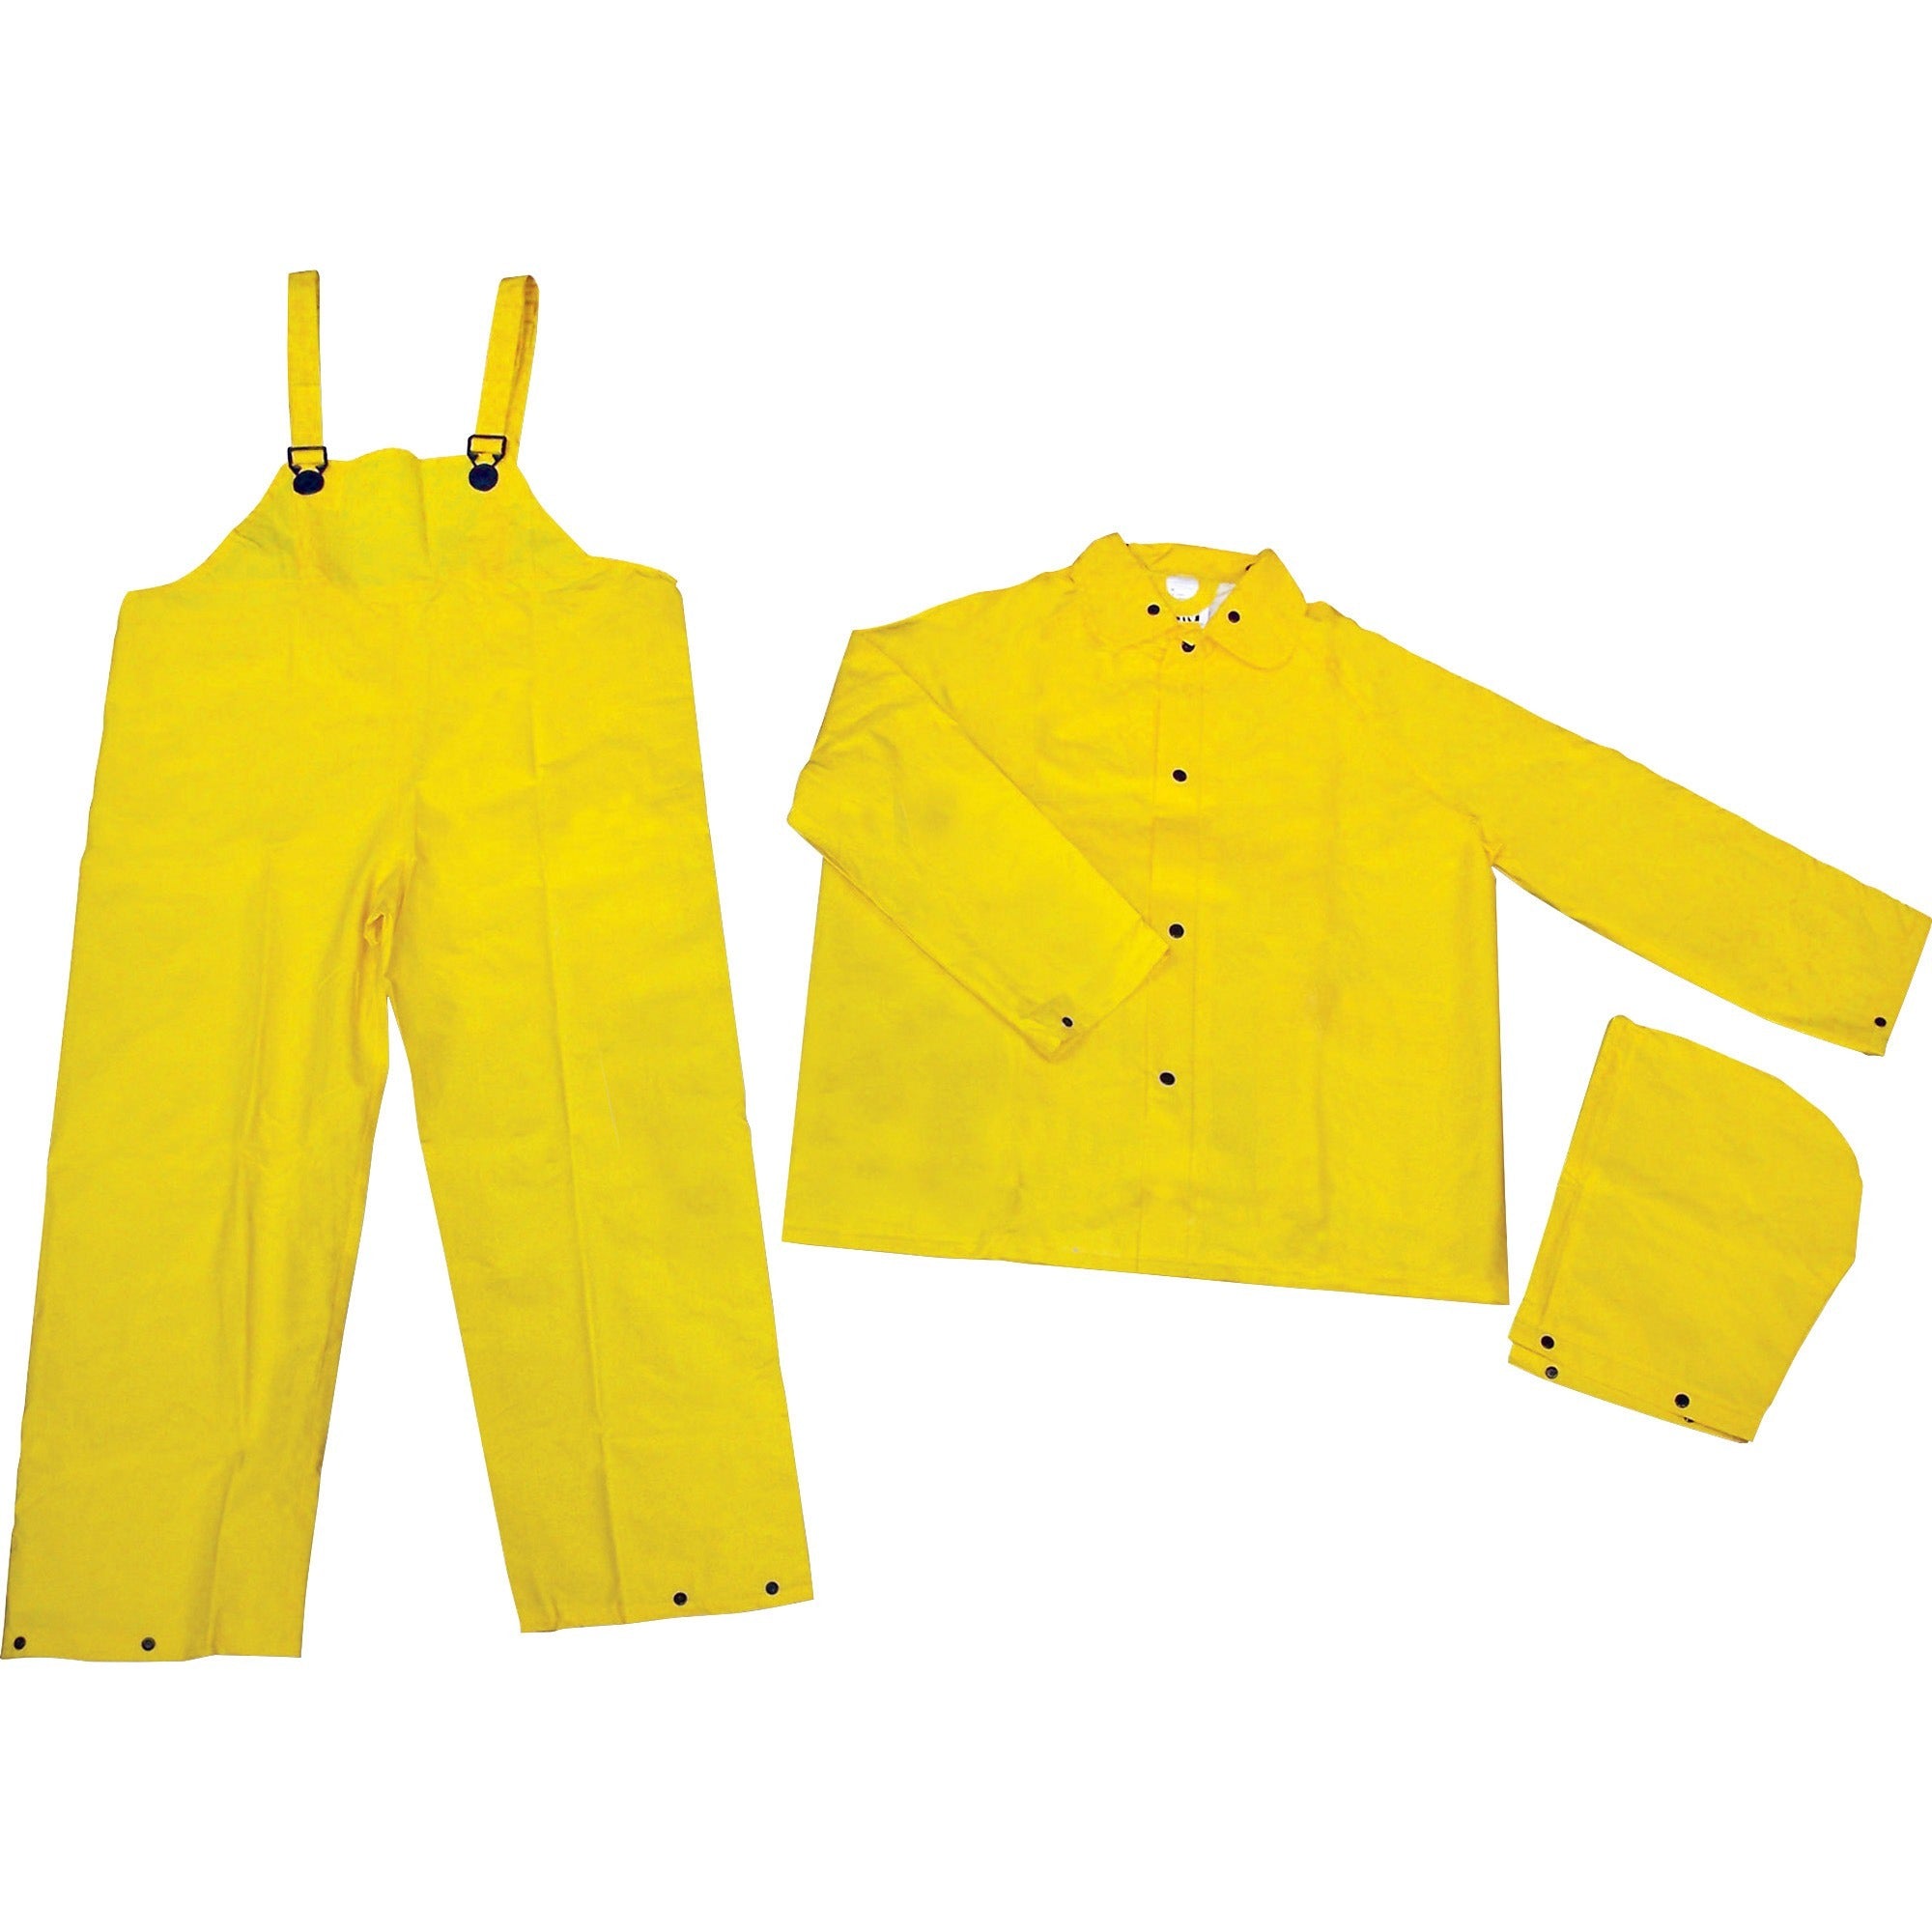 river-city-three-piece-rainsuit-recommended-for-agriculture-construction-transportation-sanitation-carpentry-landscaping-2-xtra-large-size-water-protection-snap-closure-polyester-polyvinyl-chloride-pvc-yellow-1-each_mcs2003x2 - 1